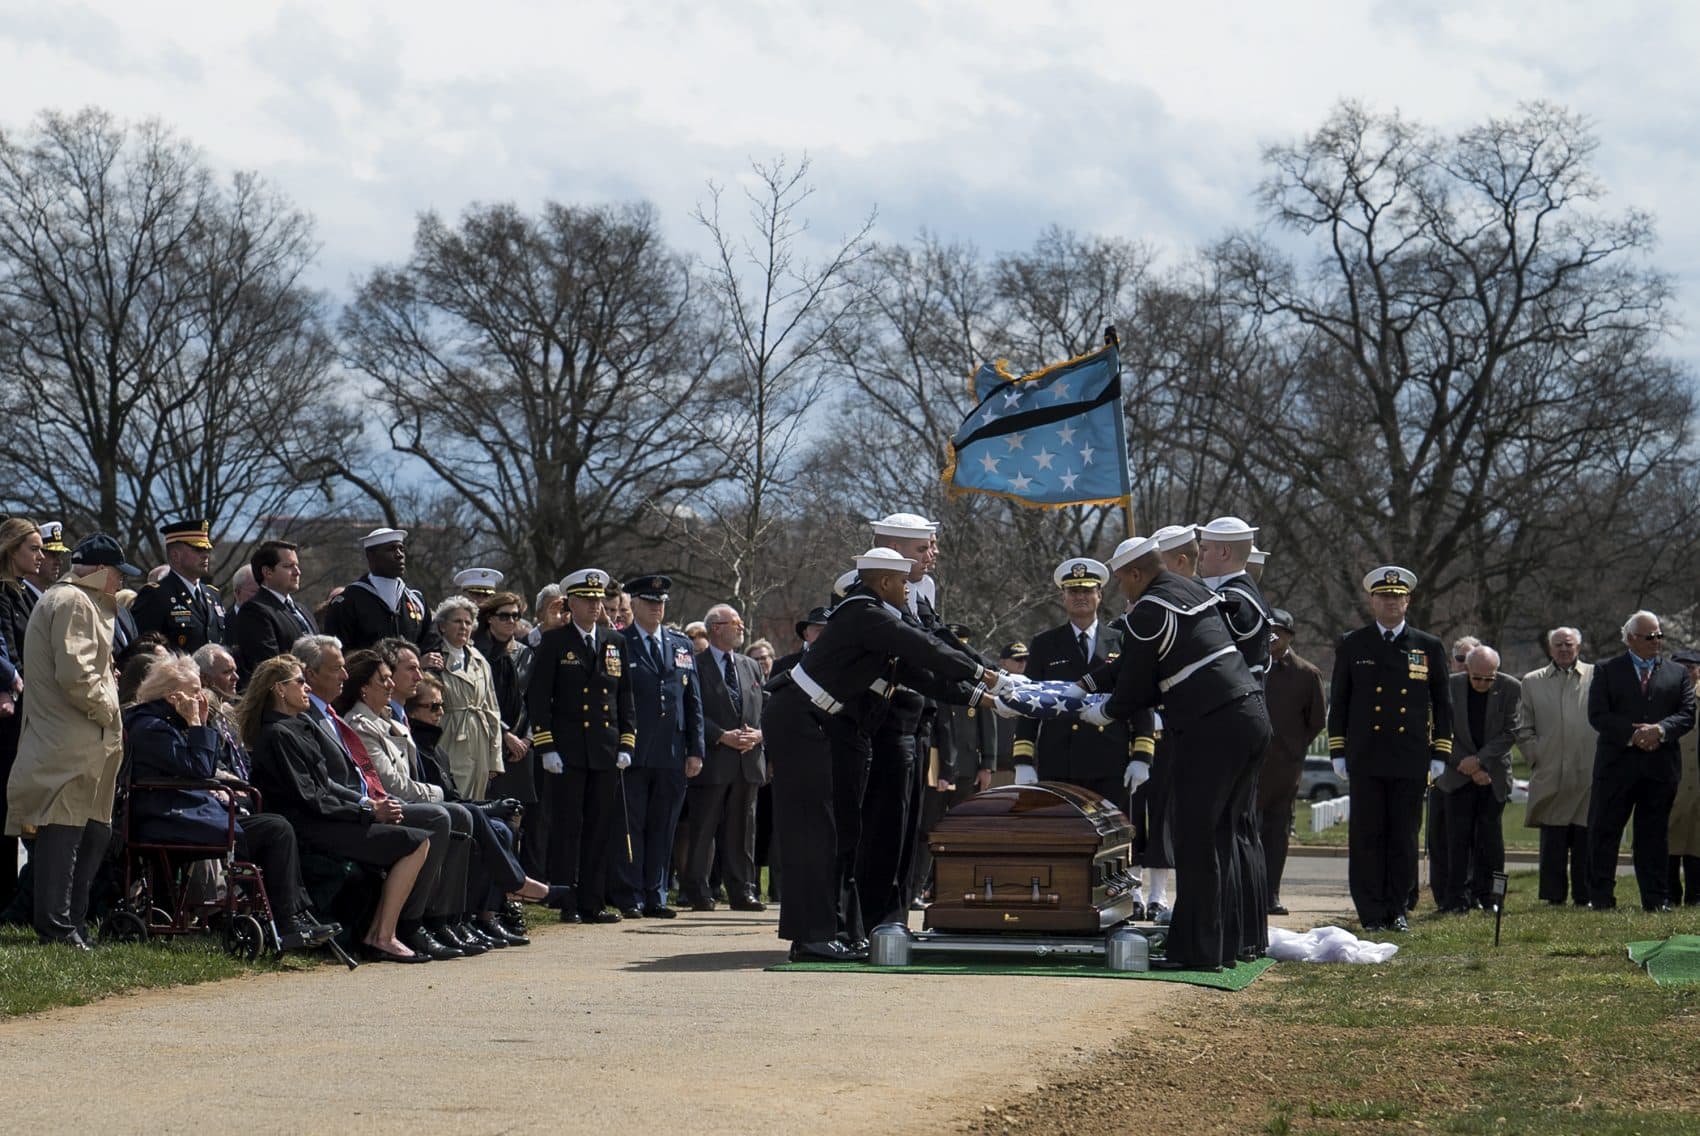 Navy Capt. Thomas Hudner Jr. is laid to rest at Arlington National Cemetery on April 4. Hudner was a naval aviator who was awarded Medal of Honor during the Korean War. (Eslah Attar/NPR)